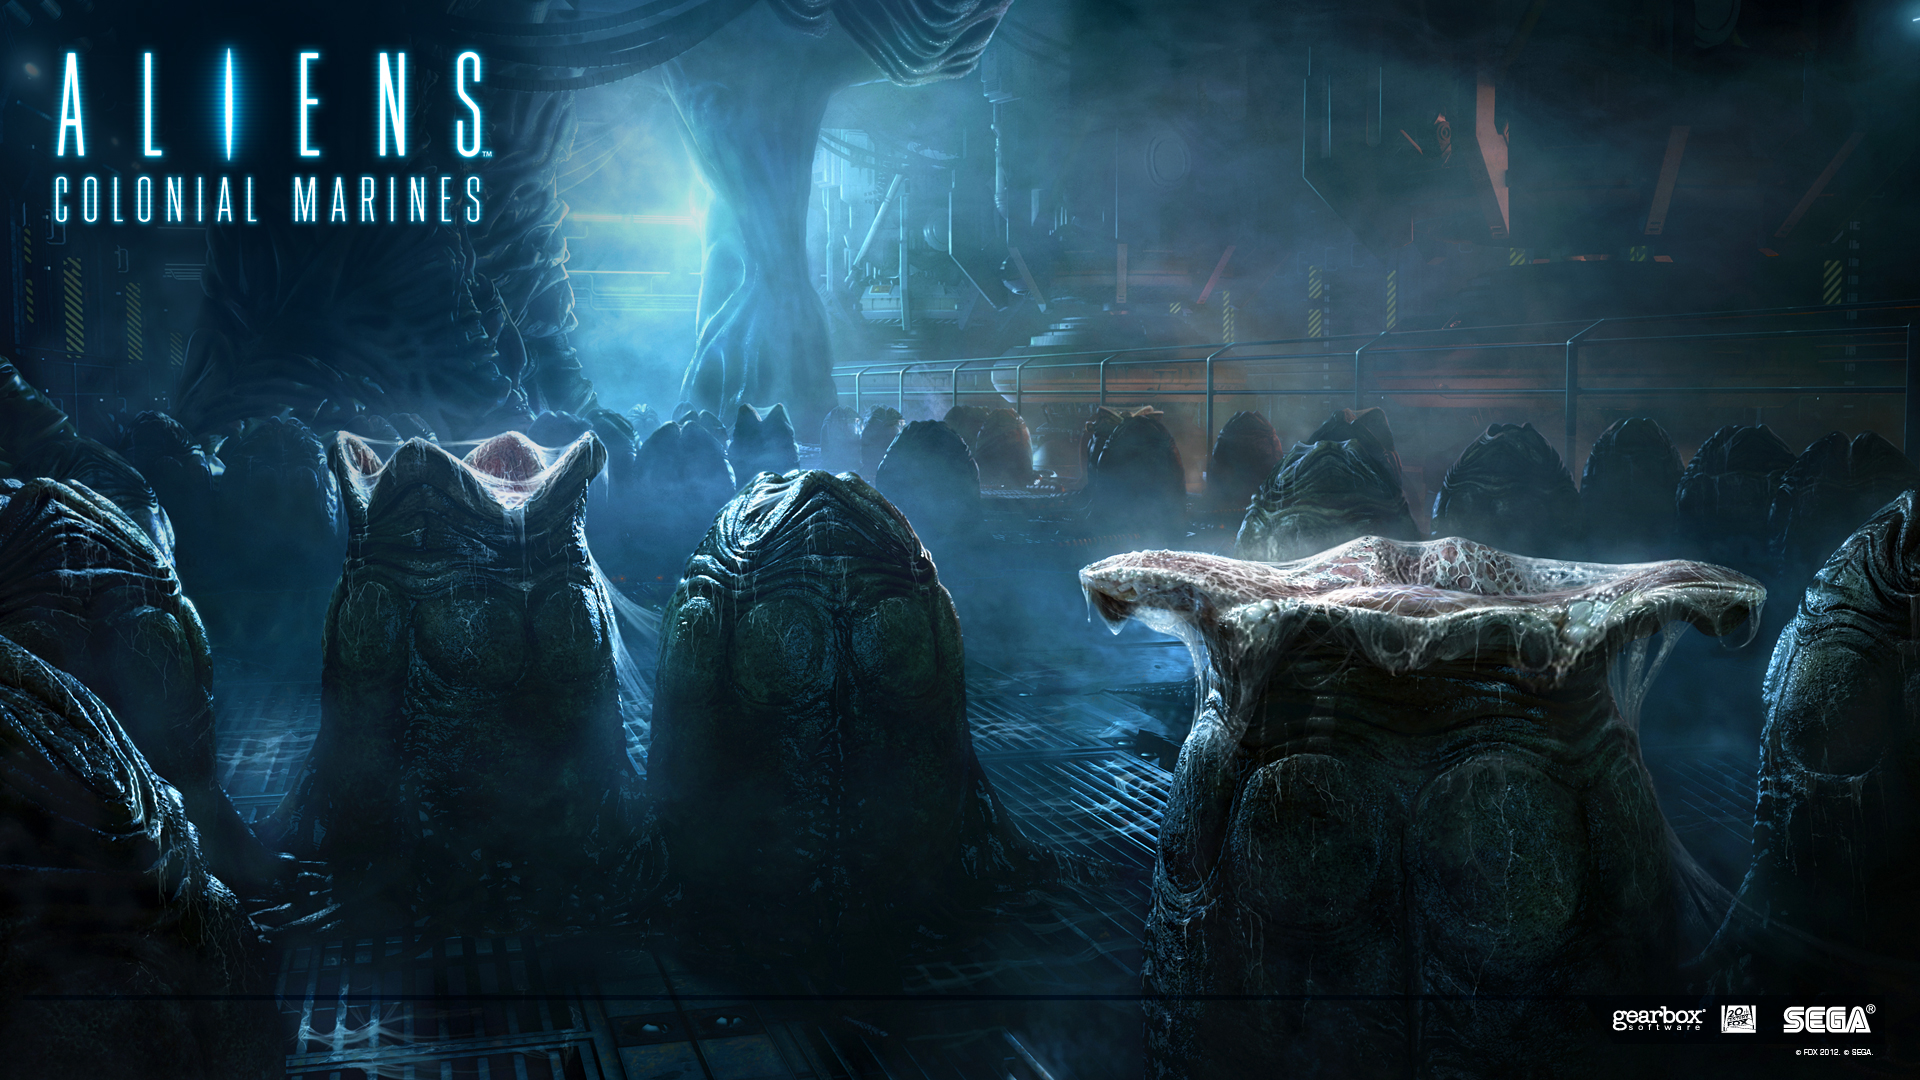 Another New Aliens Colonial Marines Wallpaper